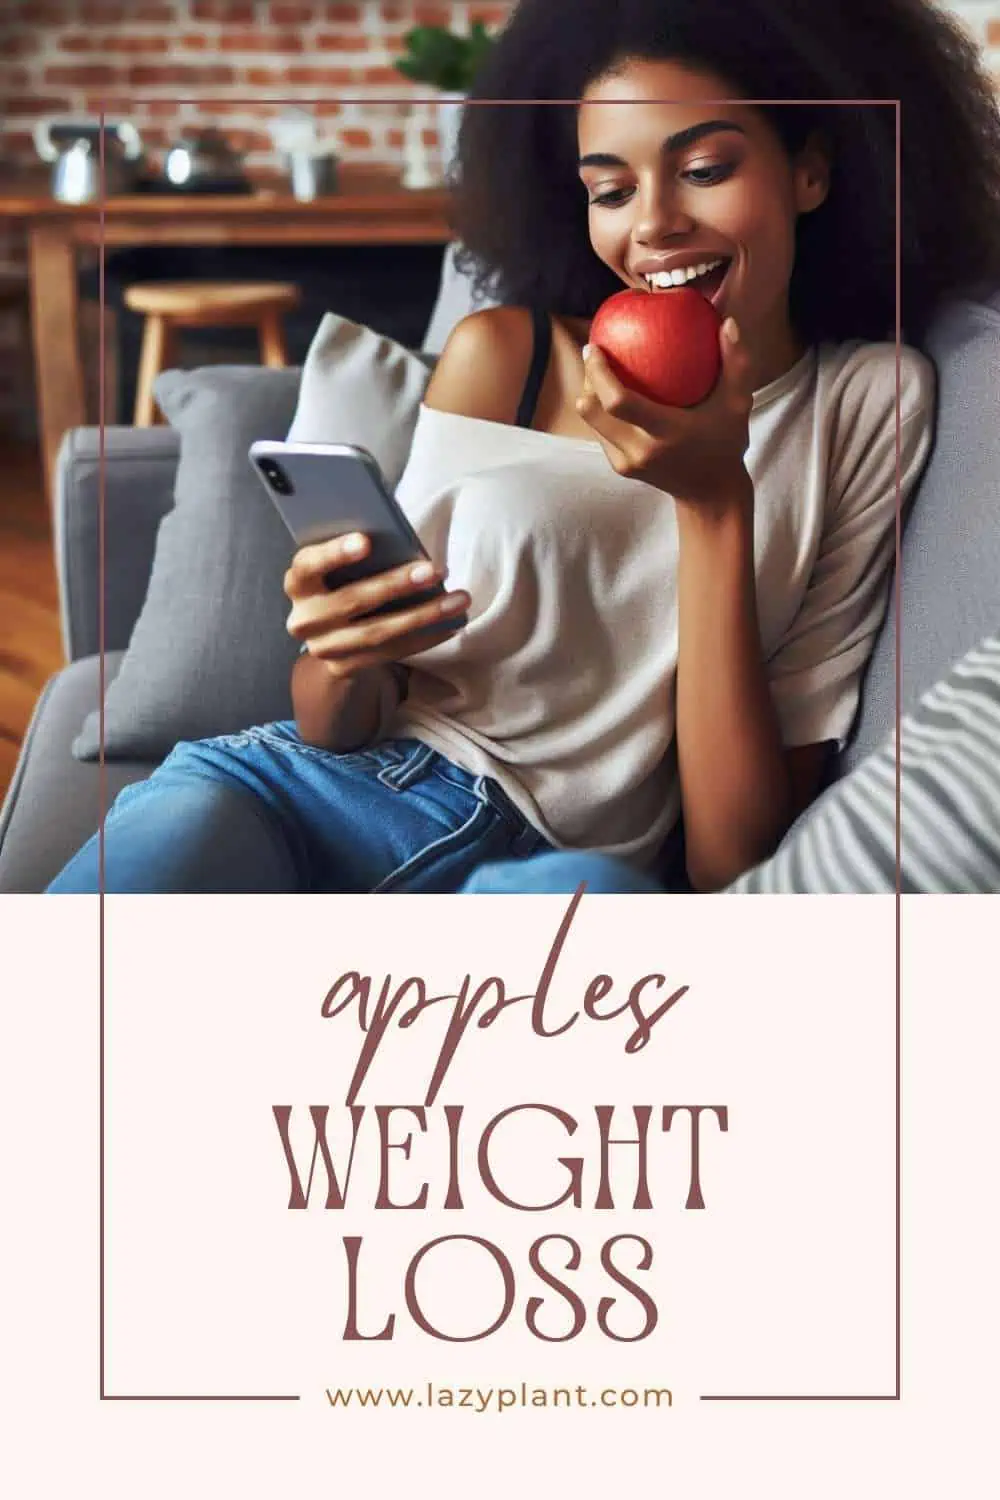 An apple every day supports Weight Loss.